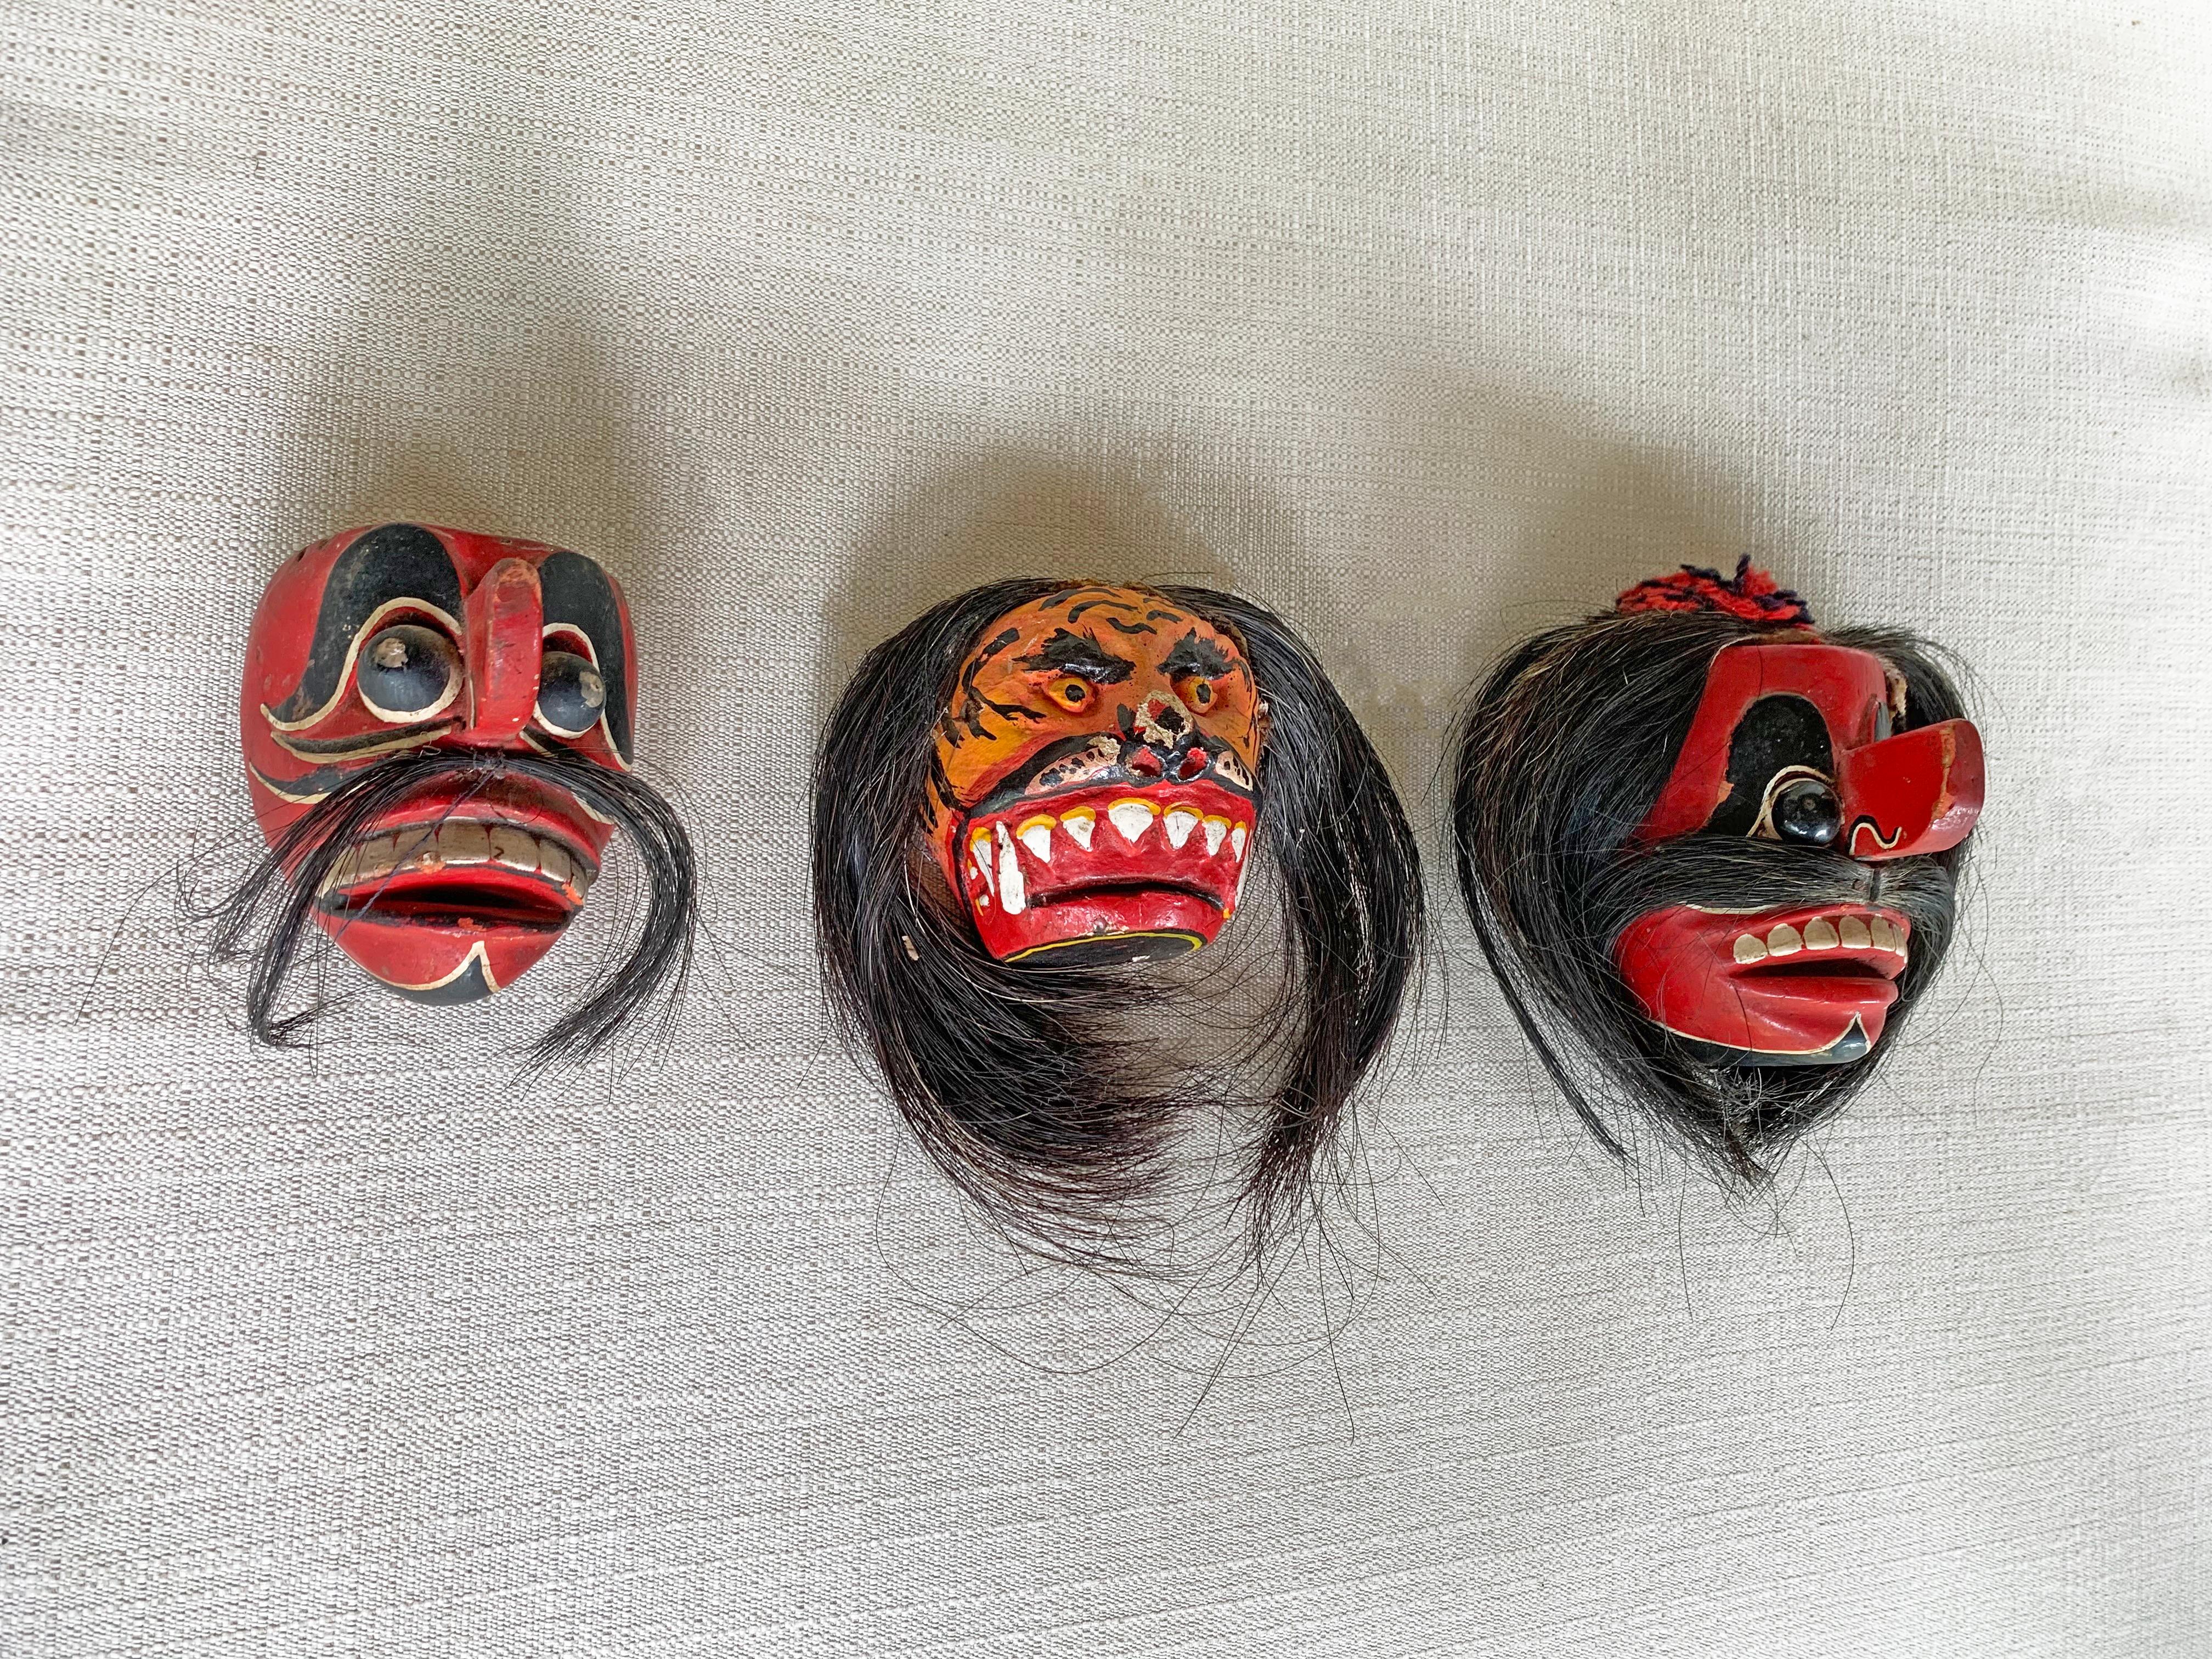 This set of 3 mid-20th century mask were sed on the island of Madura for ceremonial purposes. The island of Madura is situated off the north-eastern coast of Java. This mask features a mix of red, white & black polychrome. They also feature